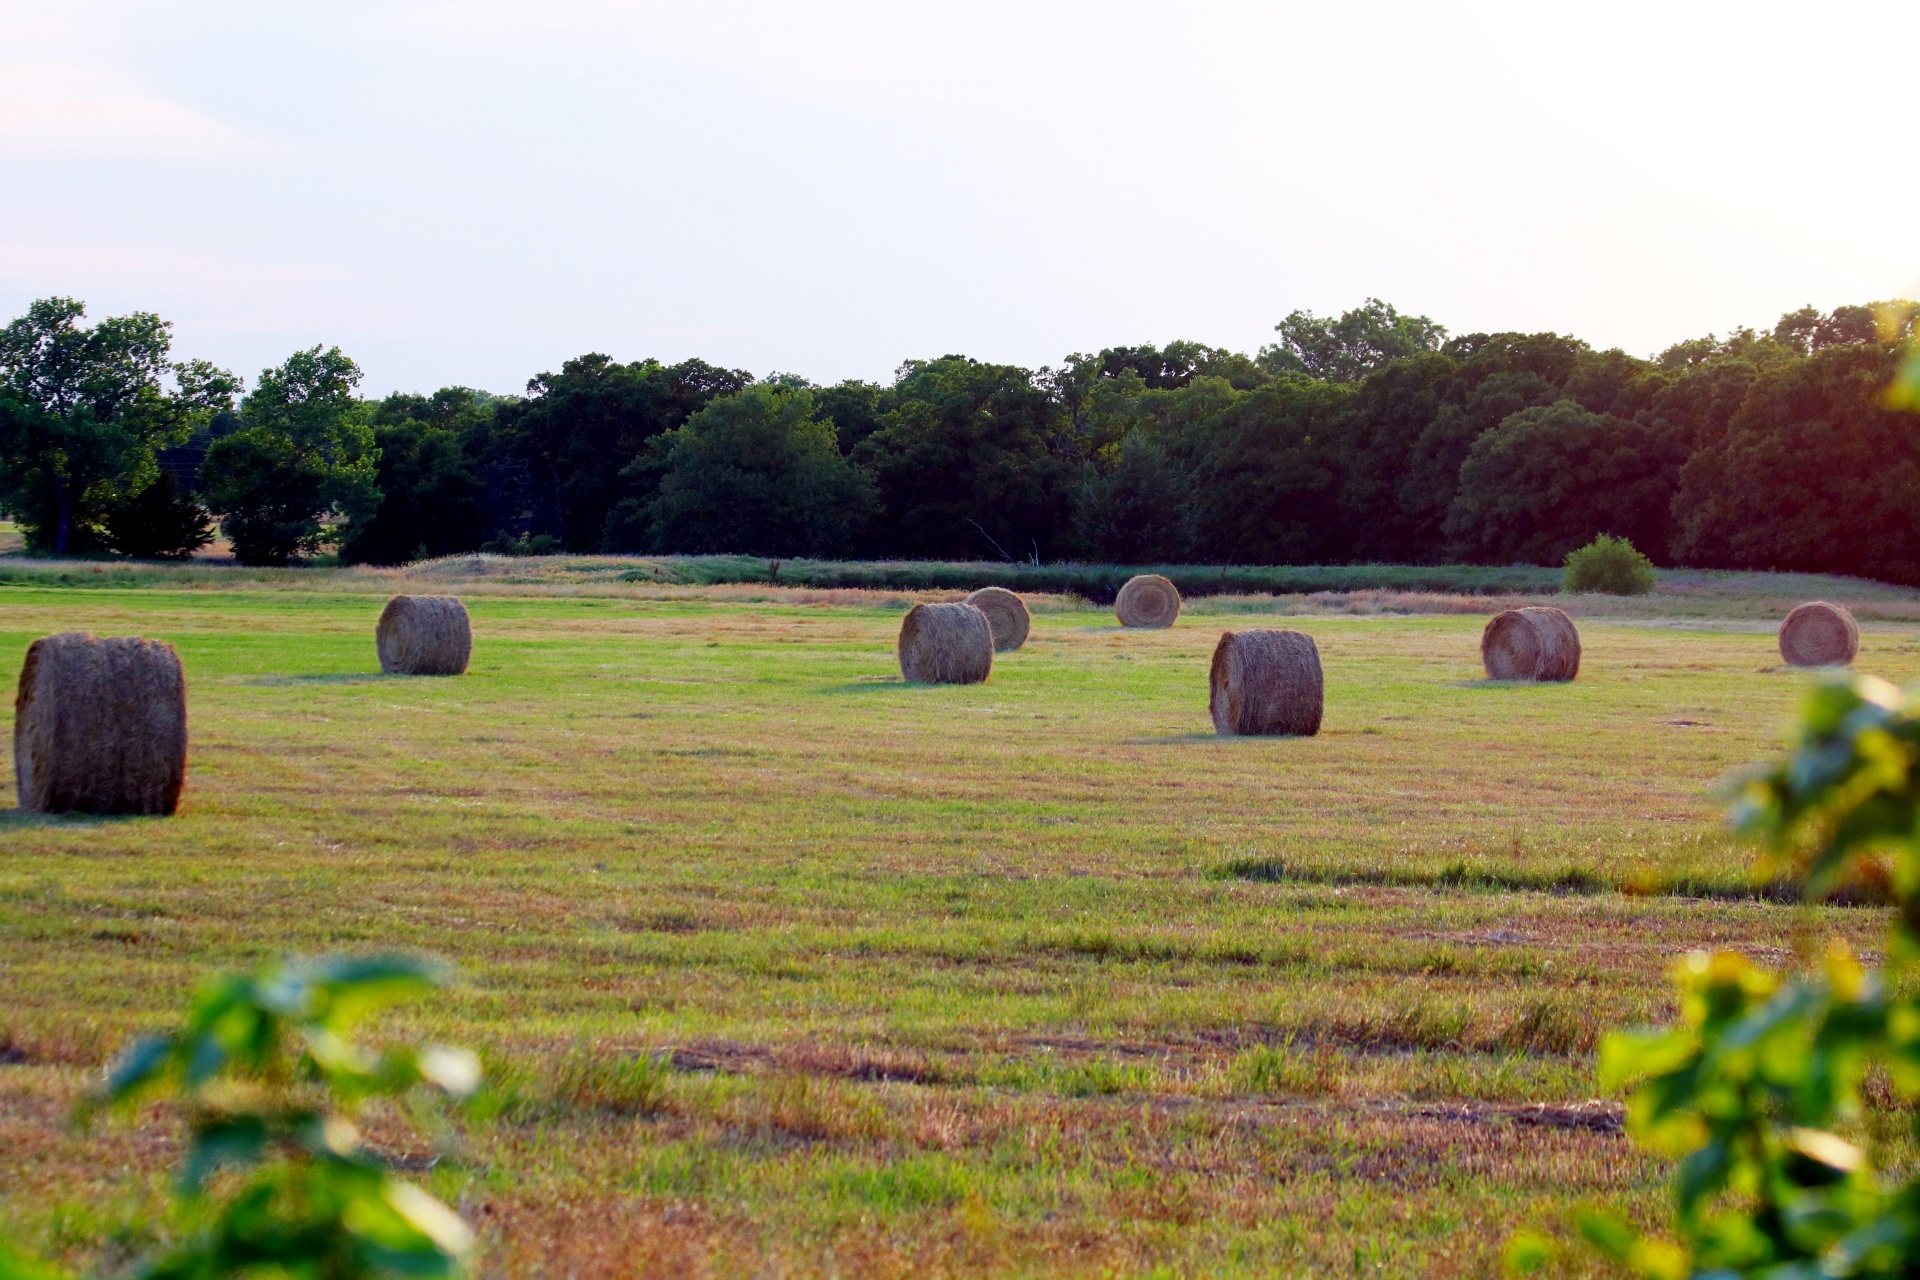 A field of round hay bales in a green and gold hay field, with trees and blue sky in the background.